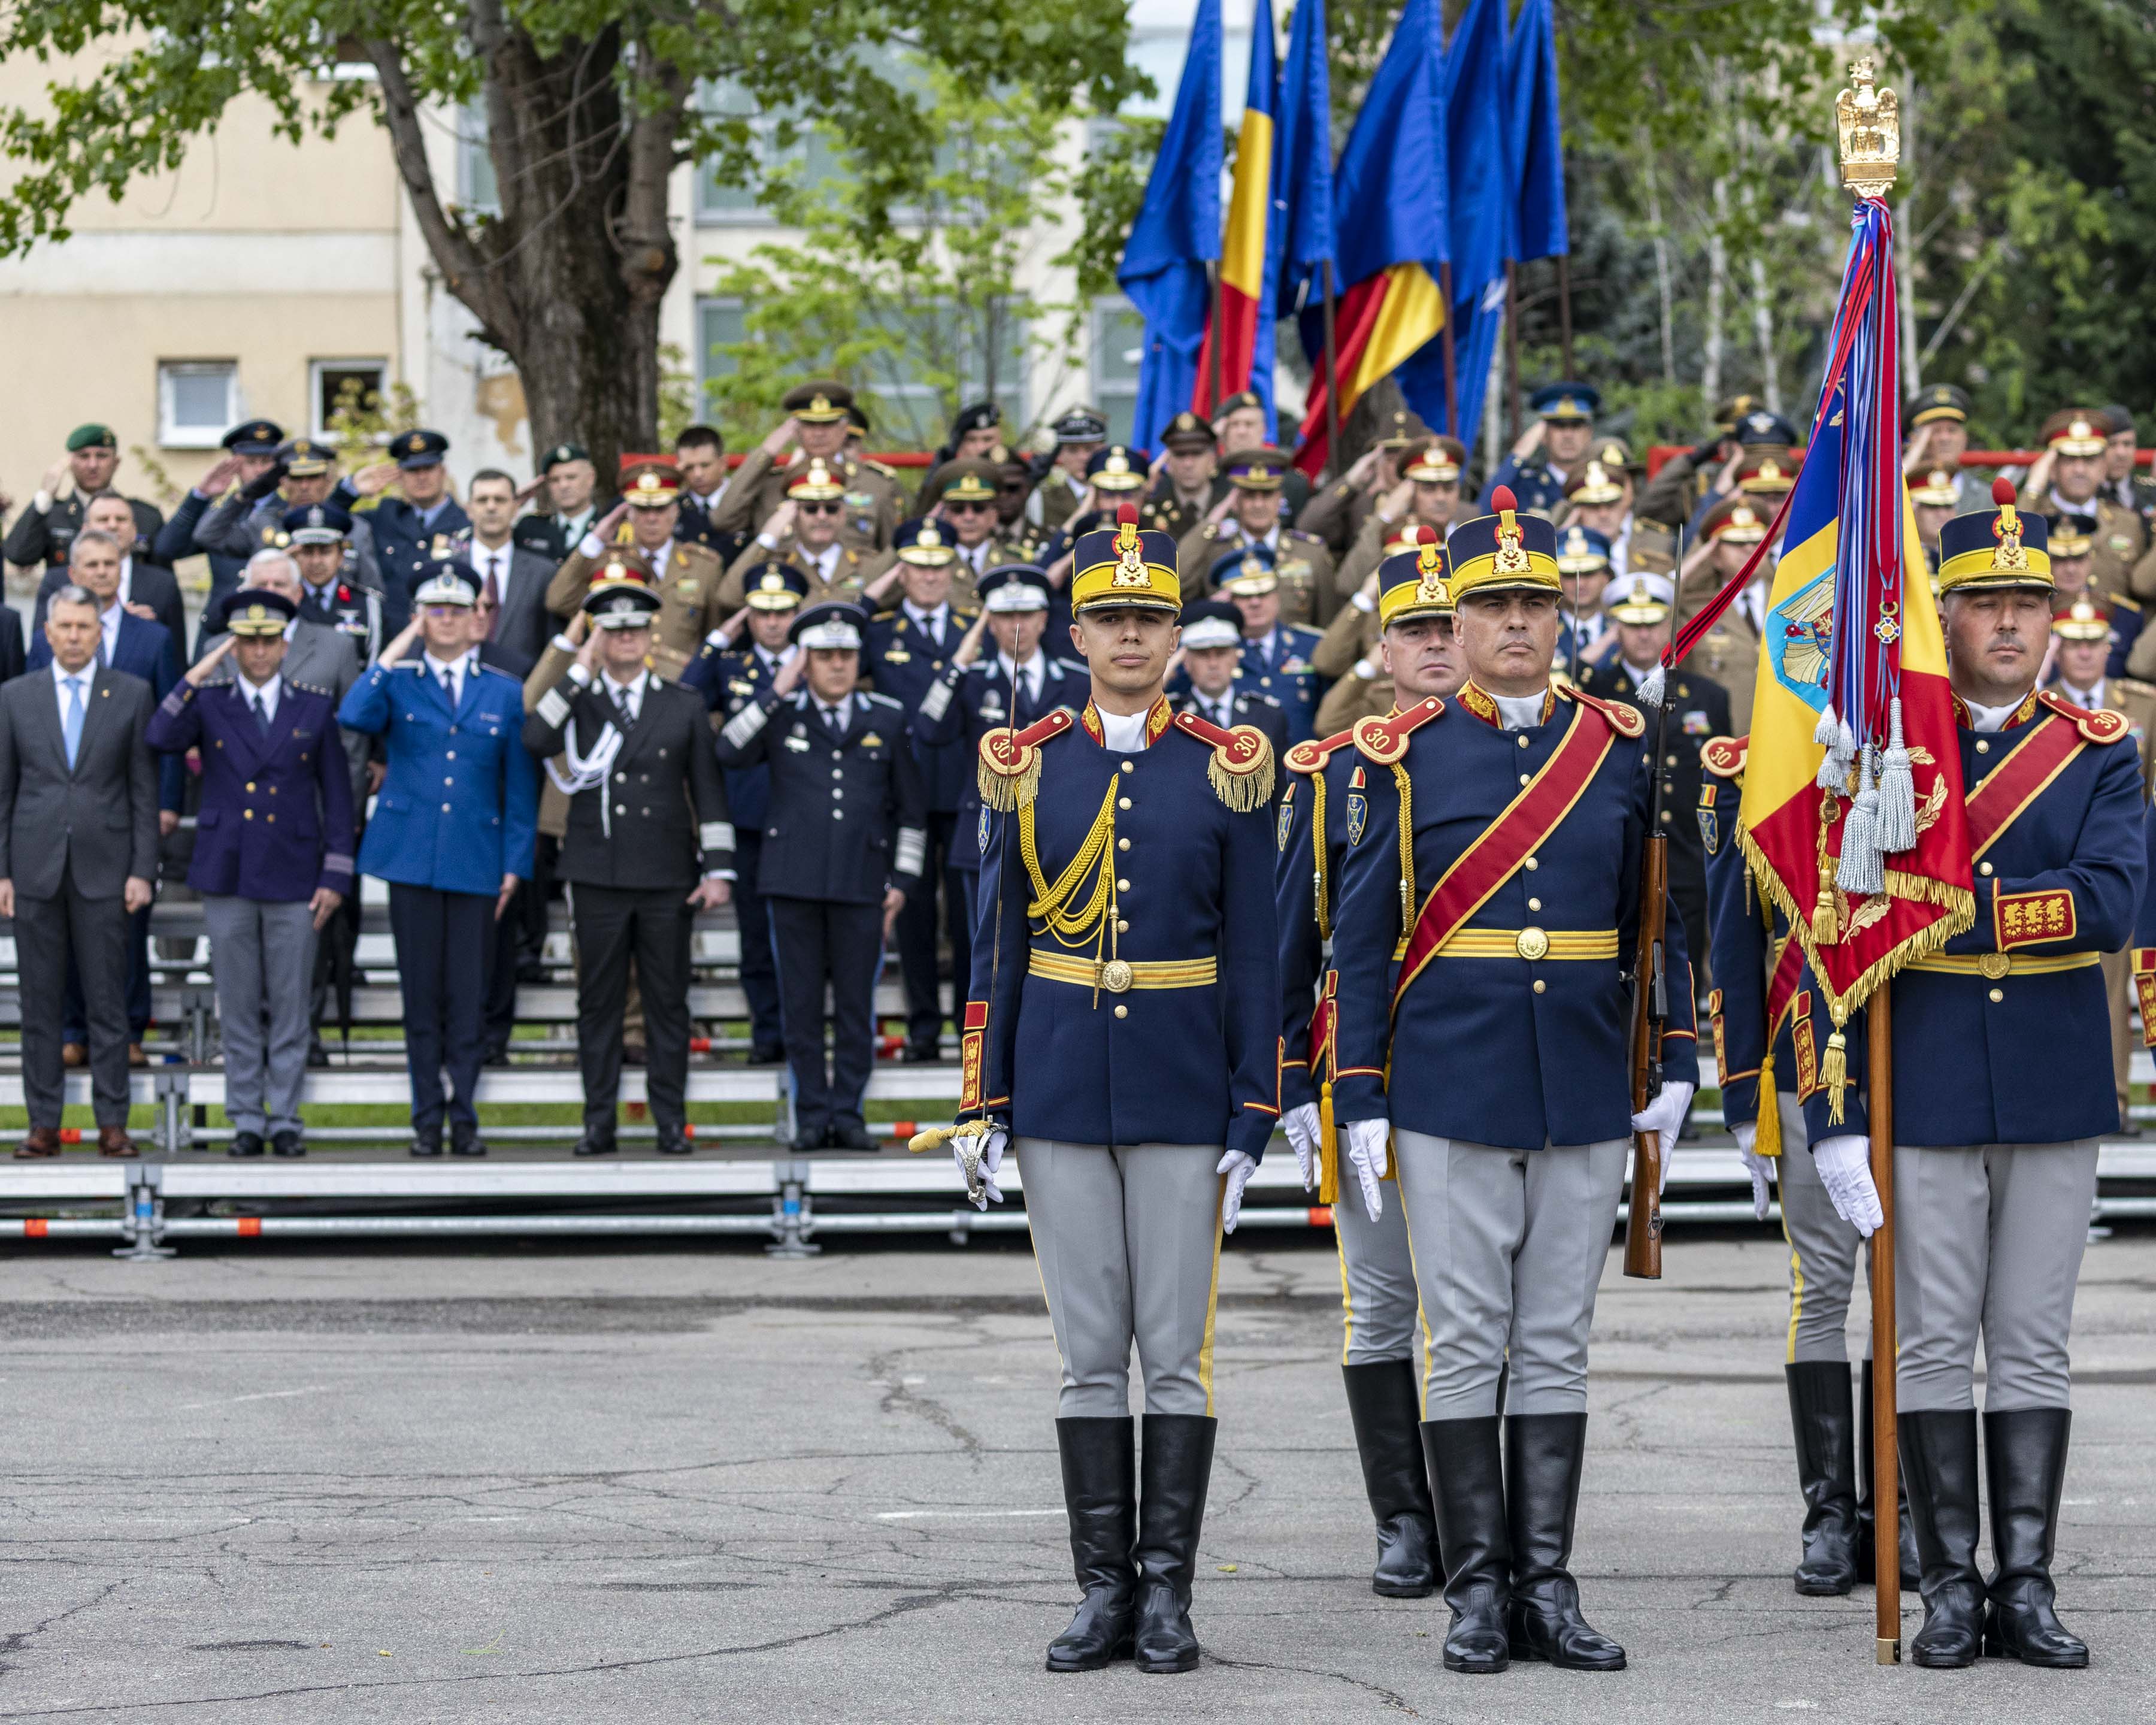 Personnel in parade.